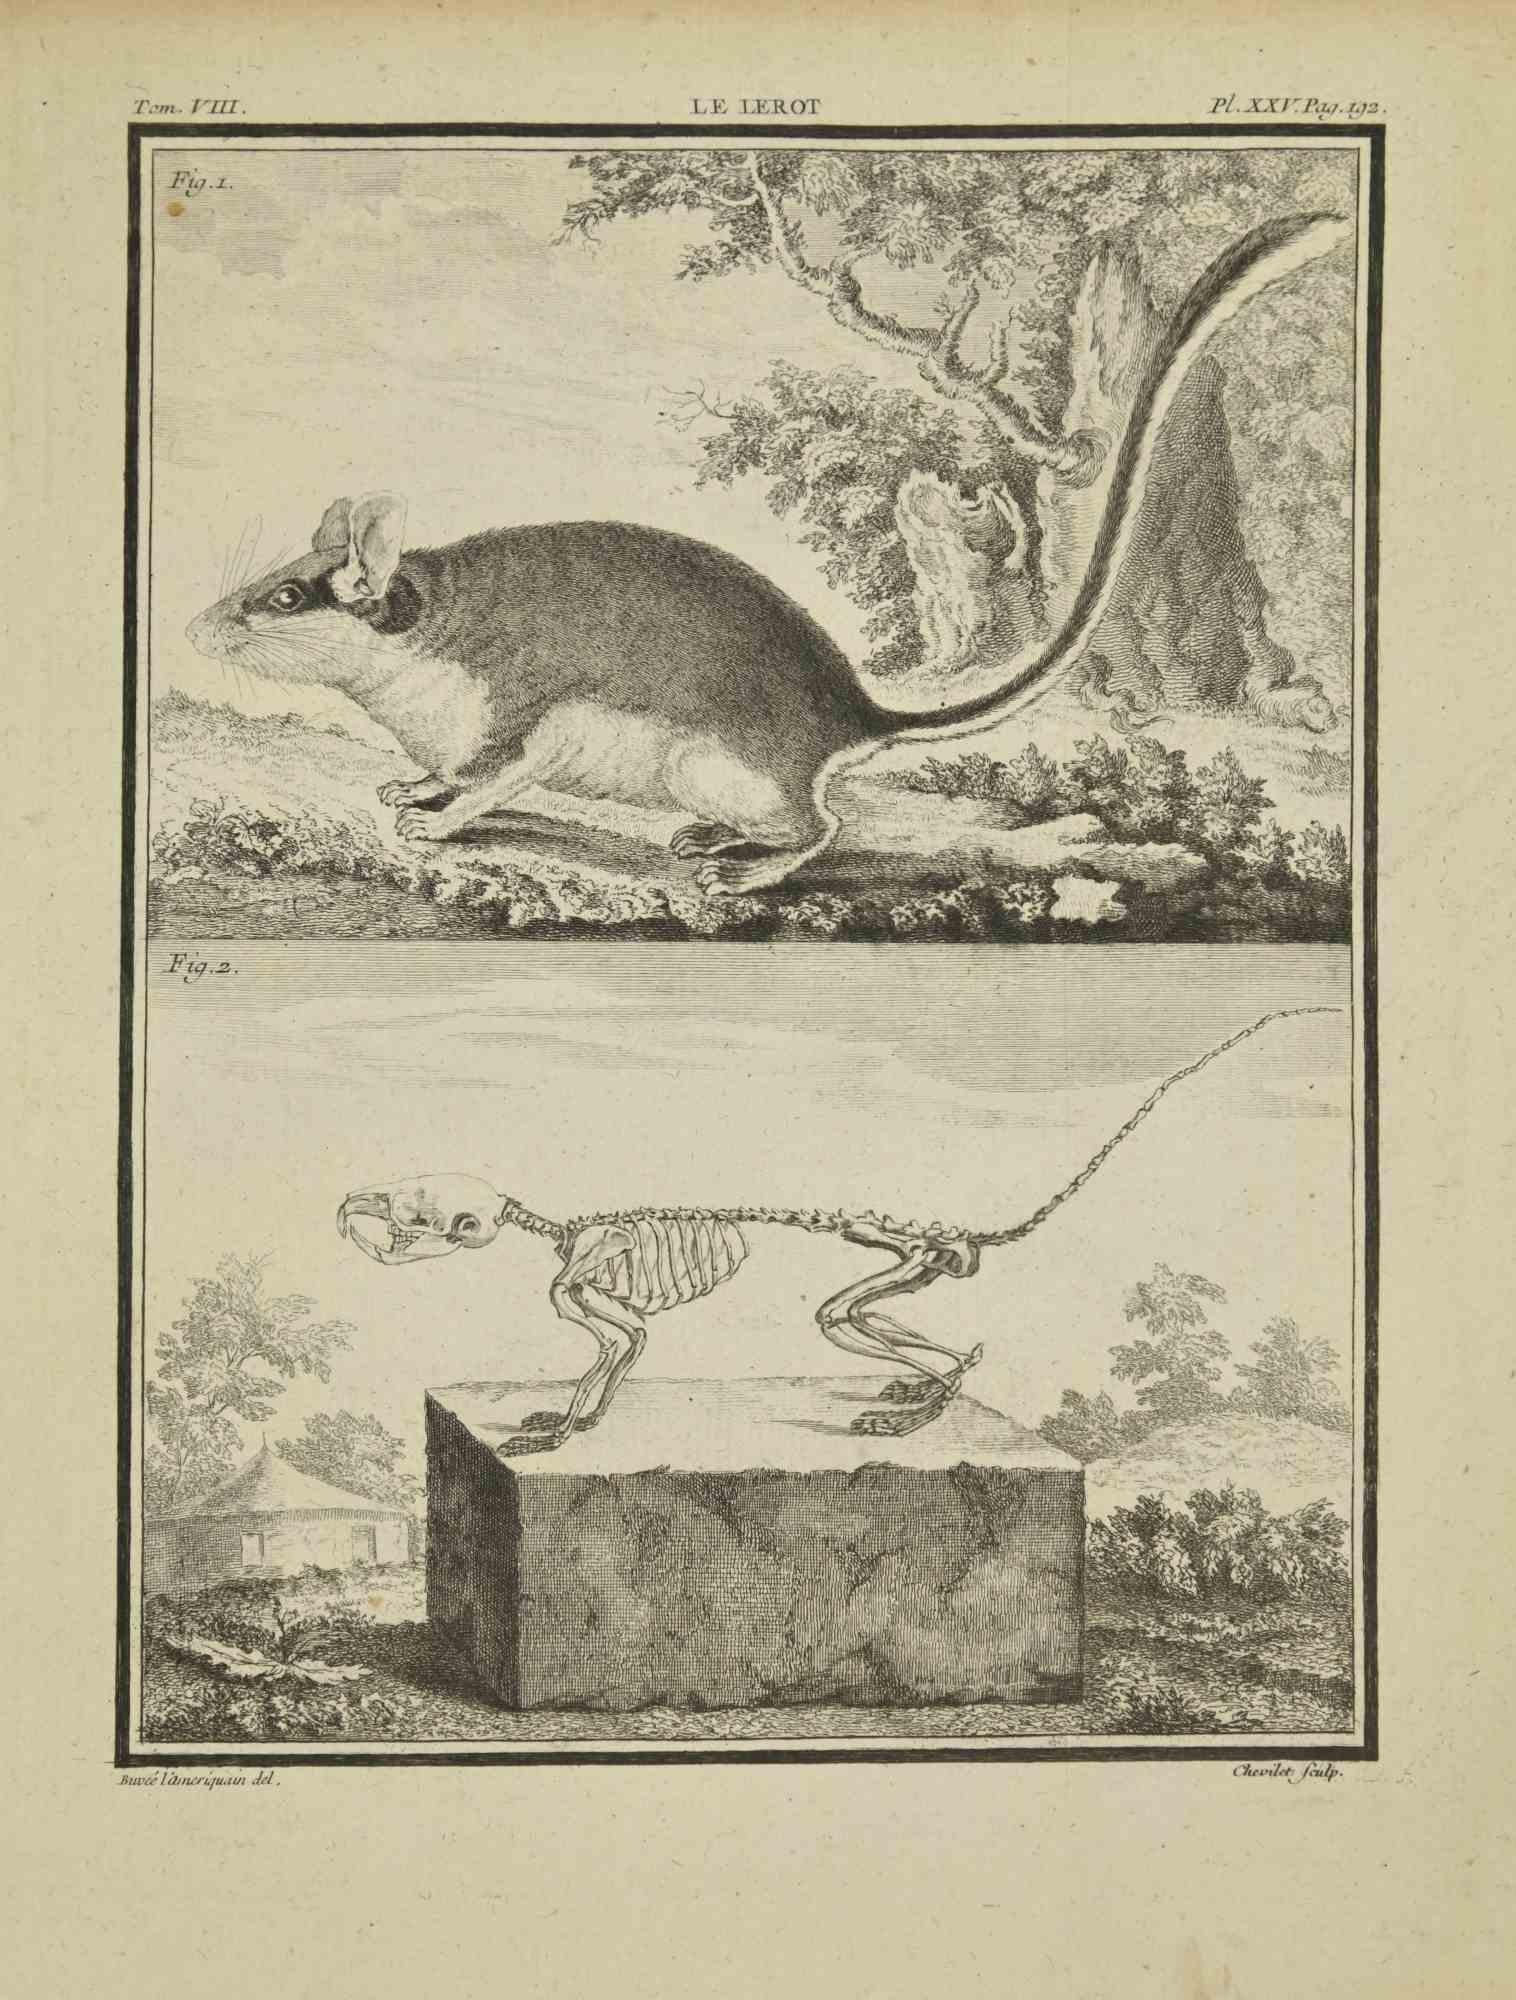 La Lerot is an etching realized by J. Chevillet in 1771.

It belongs to the suite "Histoire Naturelle de Buffon".

The Artist's signature is engraved lower right.

Good conditions.
